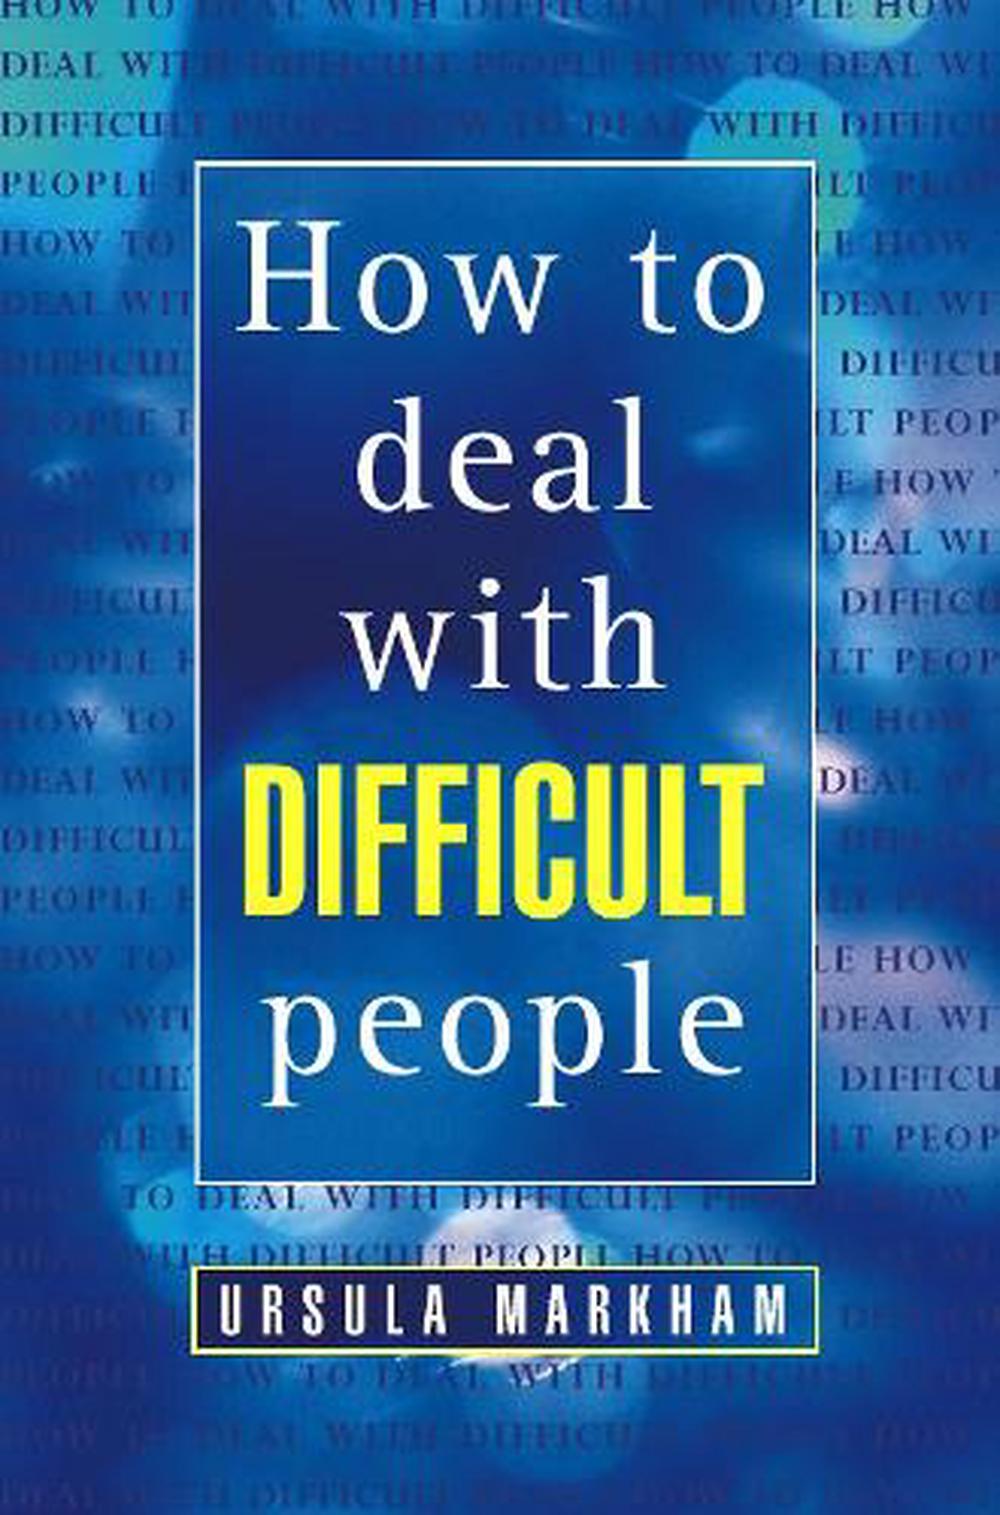 How To Deal With Difficult People By Ursula Markham Paperback 9780722527641 Buy Online At 